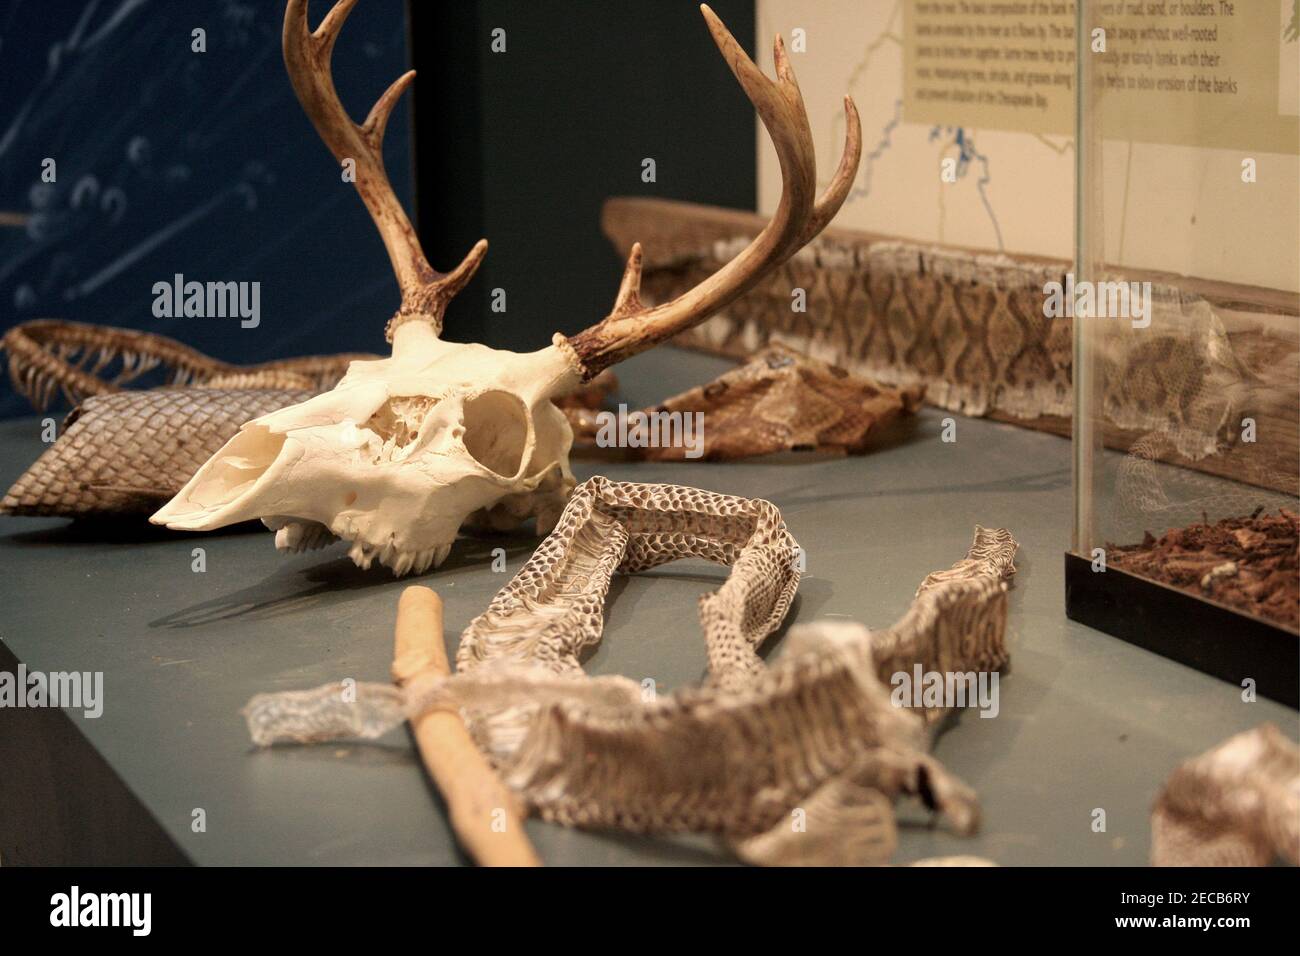 Snake skin and stag skull displayed at a nature center in Virginia, USA Stock Photo